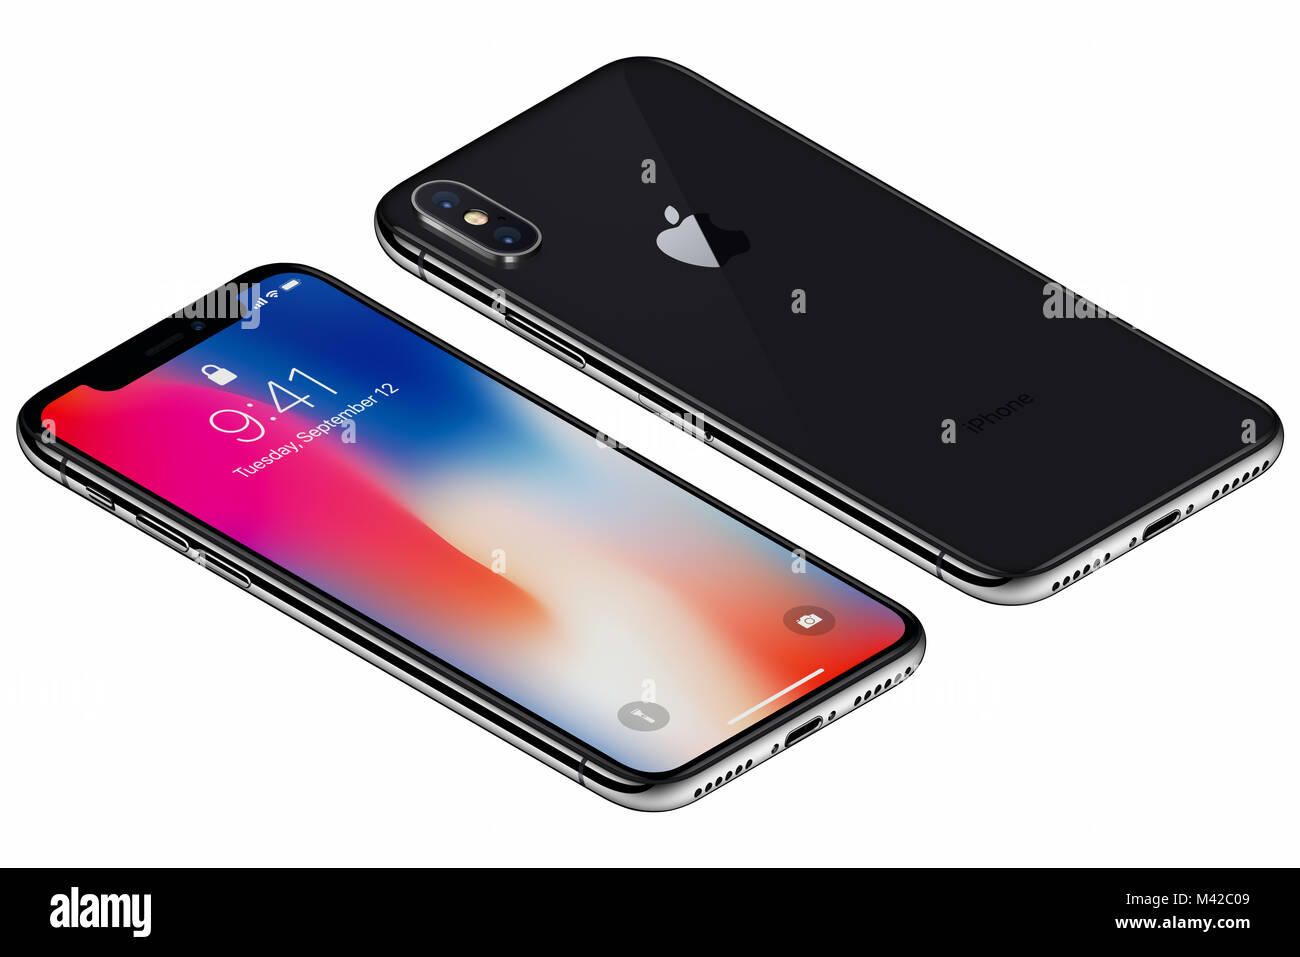 Isometric Space Gray Apple iPhone X front side with iOS 11 lockscreen and back side isolated on white background. Stock Photo